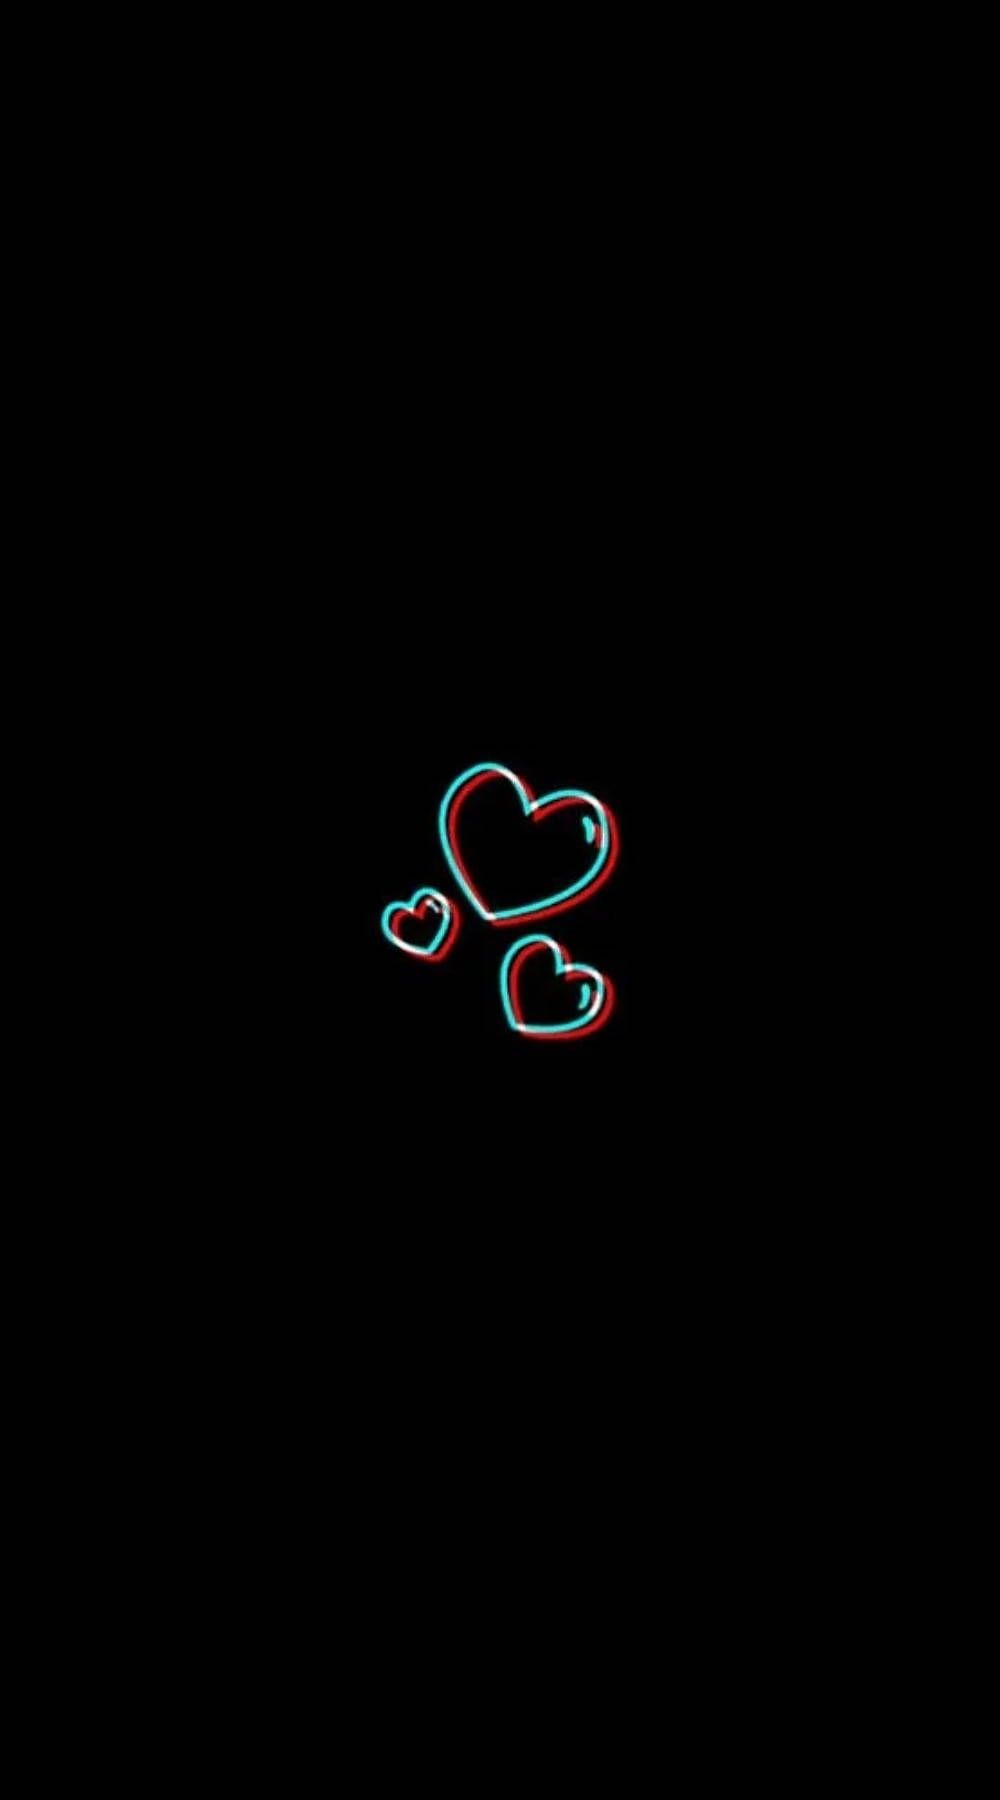 A heart shaped object is on the black background - Black heart